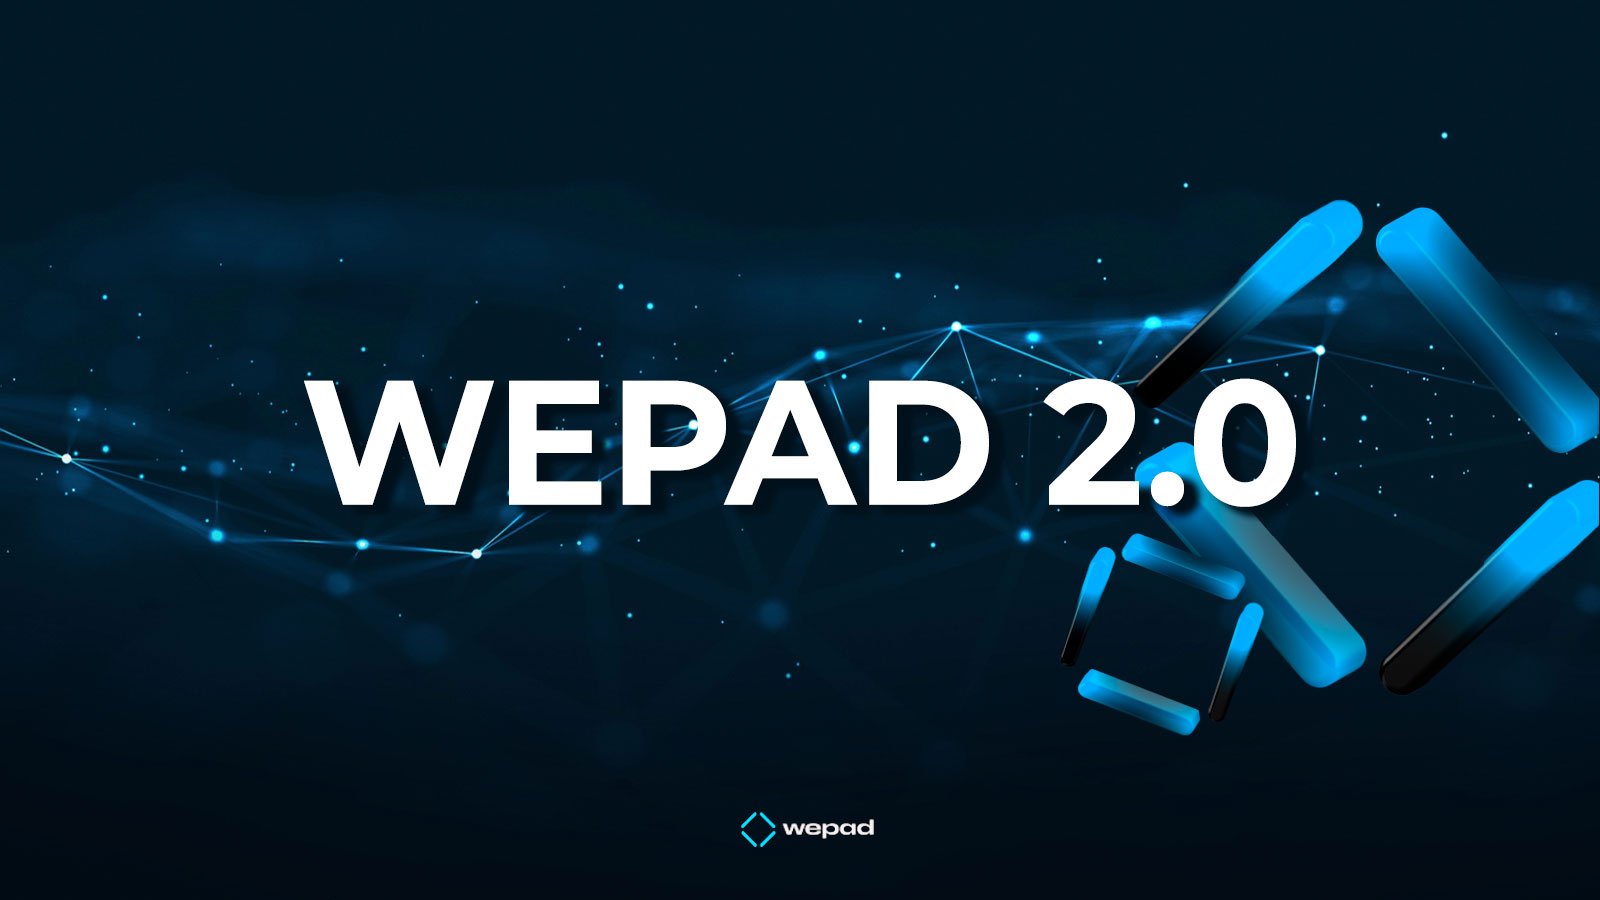 WePad Unveils Exciting Upgrades with the Launch of WePad 2.0